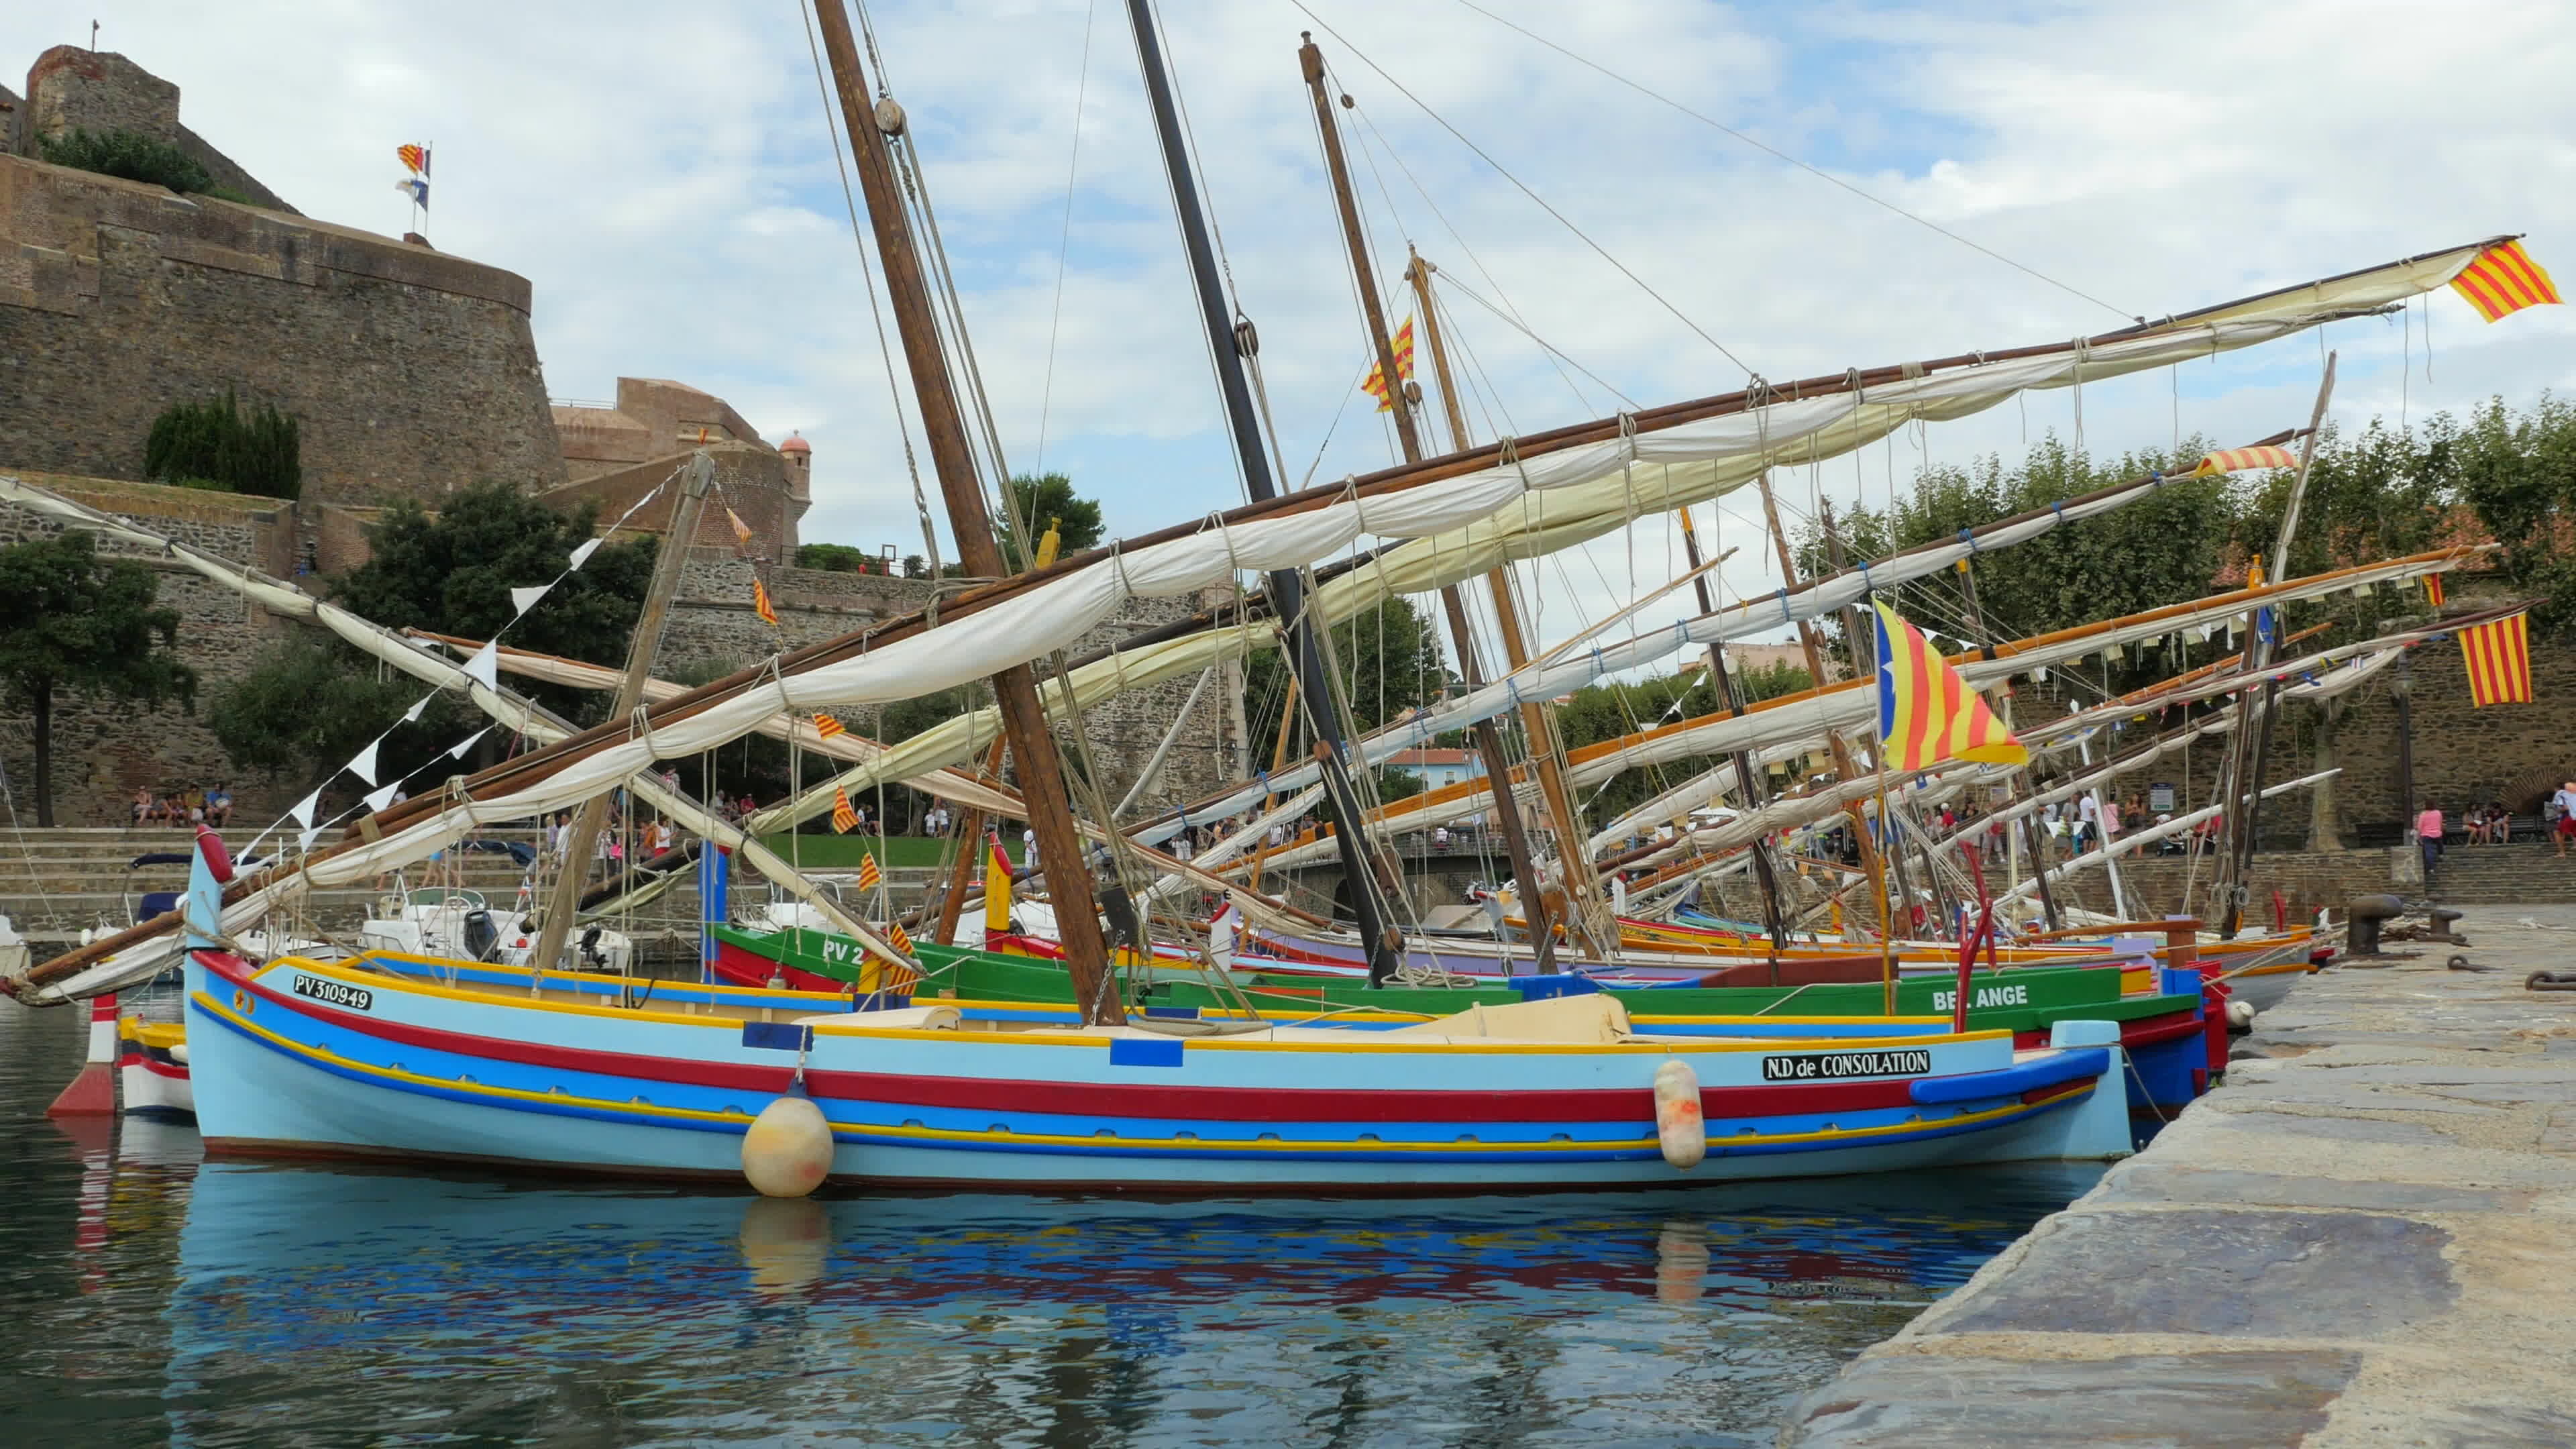 Boat: Traditional colorful small watercraft, Collioure Harbor, France. 3840x2160 4K Wallpaper.